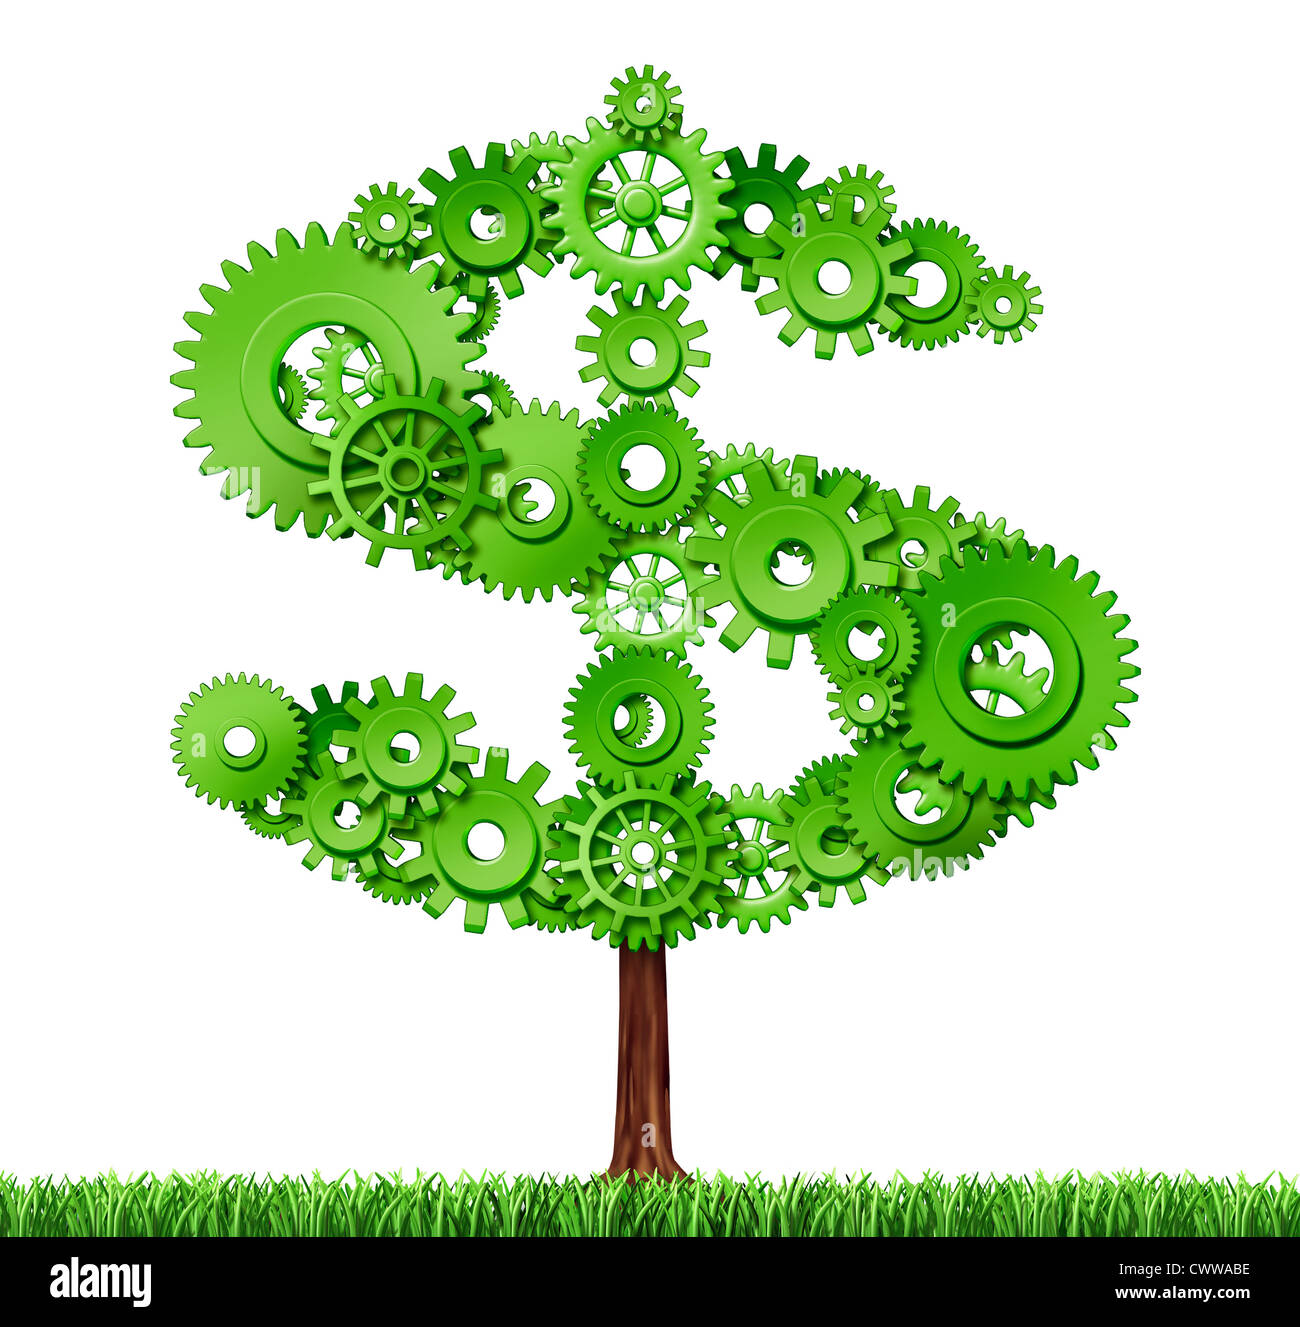 Making money and building wealth symbol represented by a growing tree in the shape of a dollar sign made of gears and coggs showing the concept of success and profits from manufacturing and providing services. Stock Photo